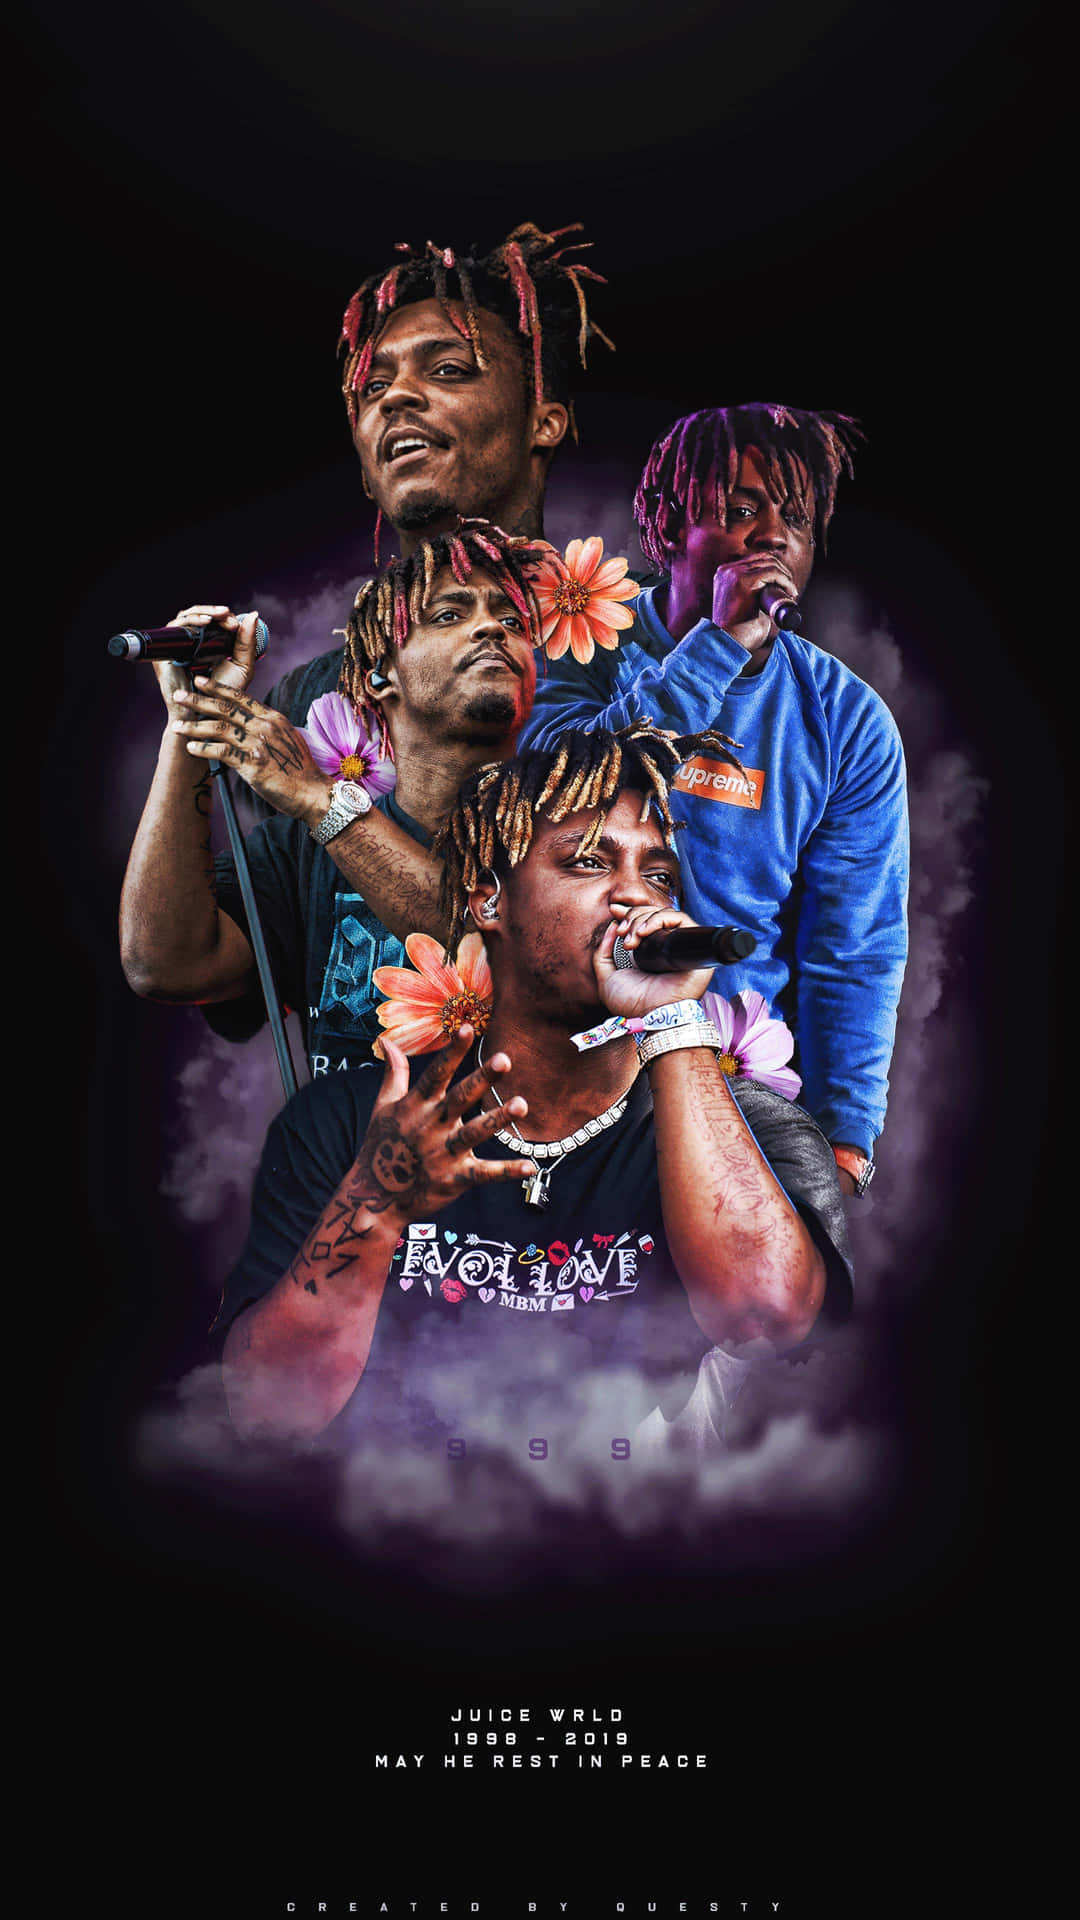 The late Xxxtentacion and Juice Wrld performing at their joint tour, Legends Never Die. Wallpaper